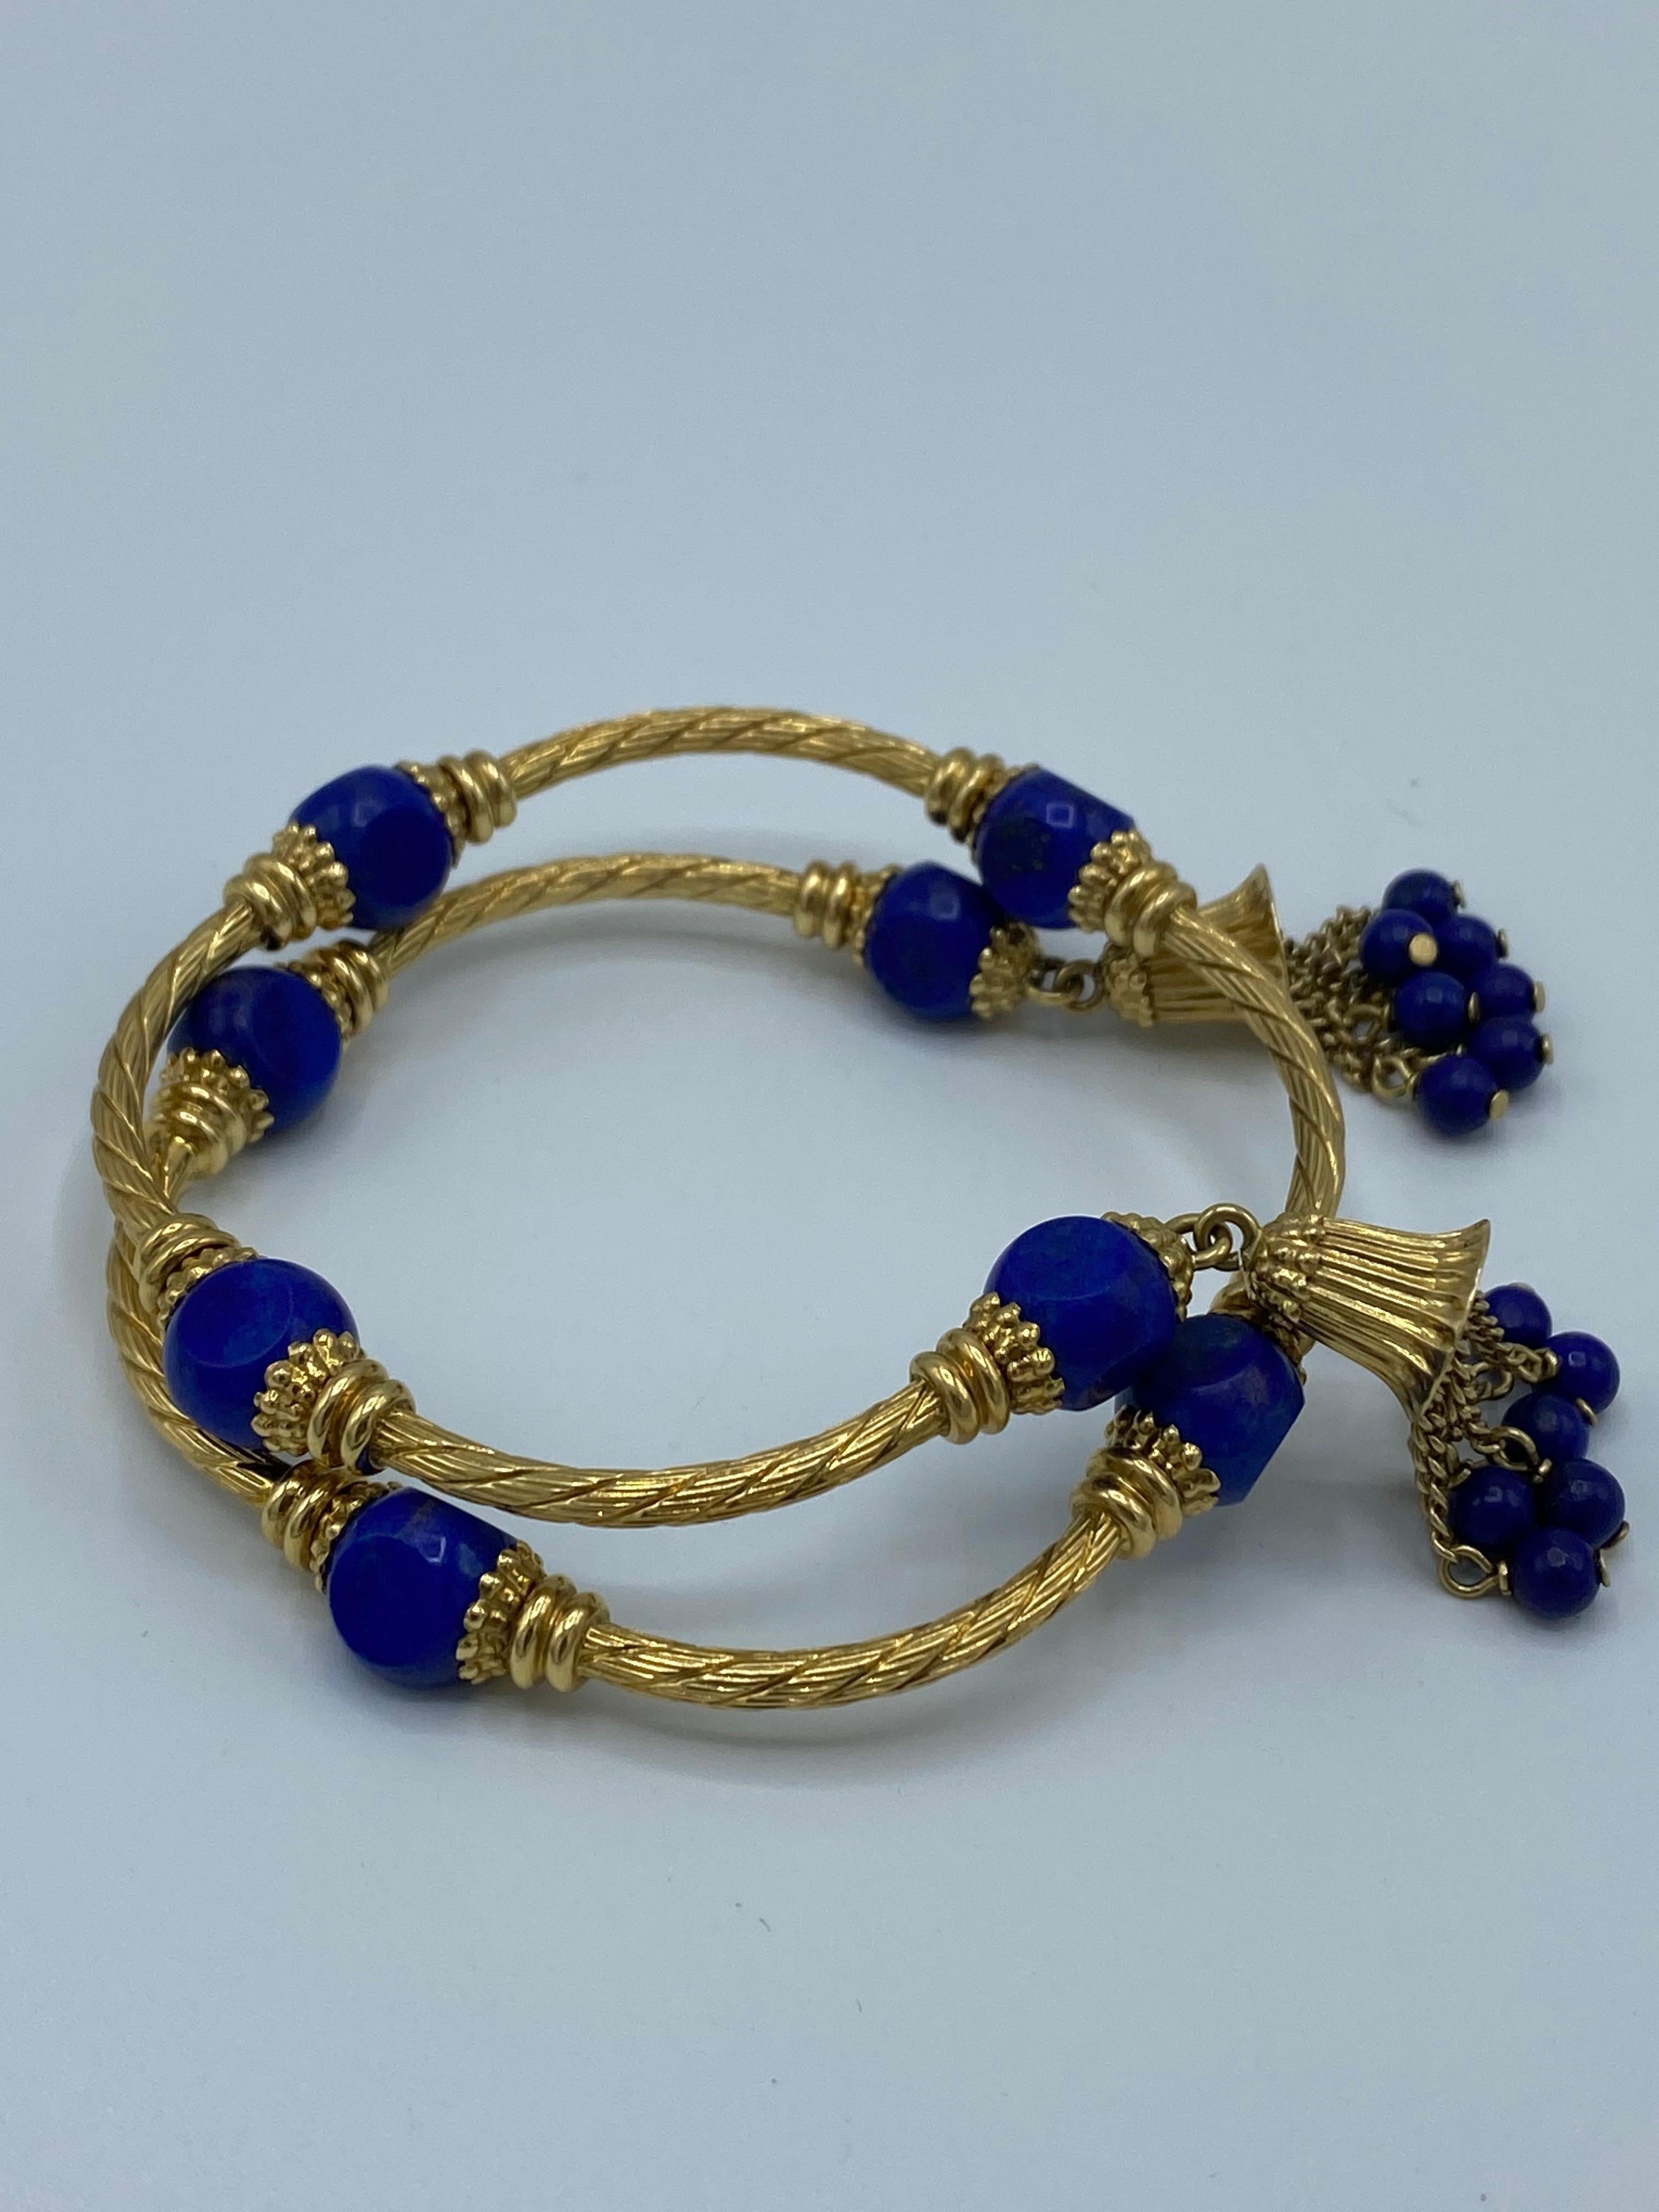 Product details:

The bracelet is designed by Carlo Weingrill, it is made out of 18 karat yellow wired gold and lapis beaded detail with gold chain and lapis beads tassel on each end of the bangle, the bracelet features wrap around